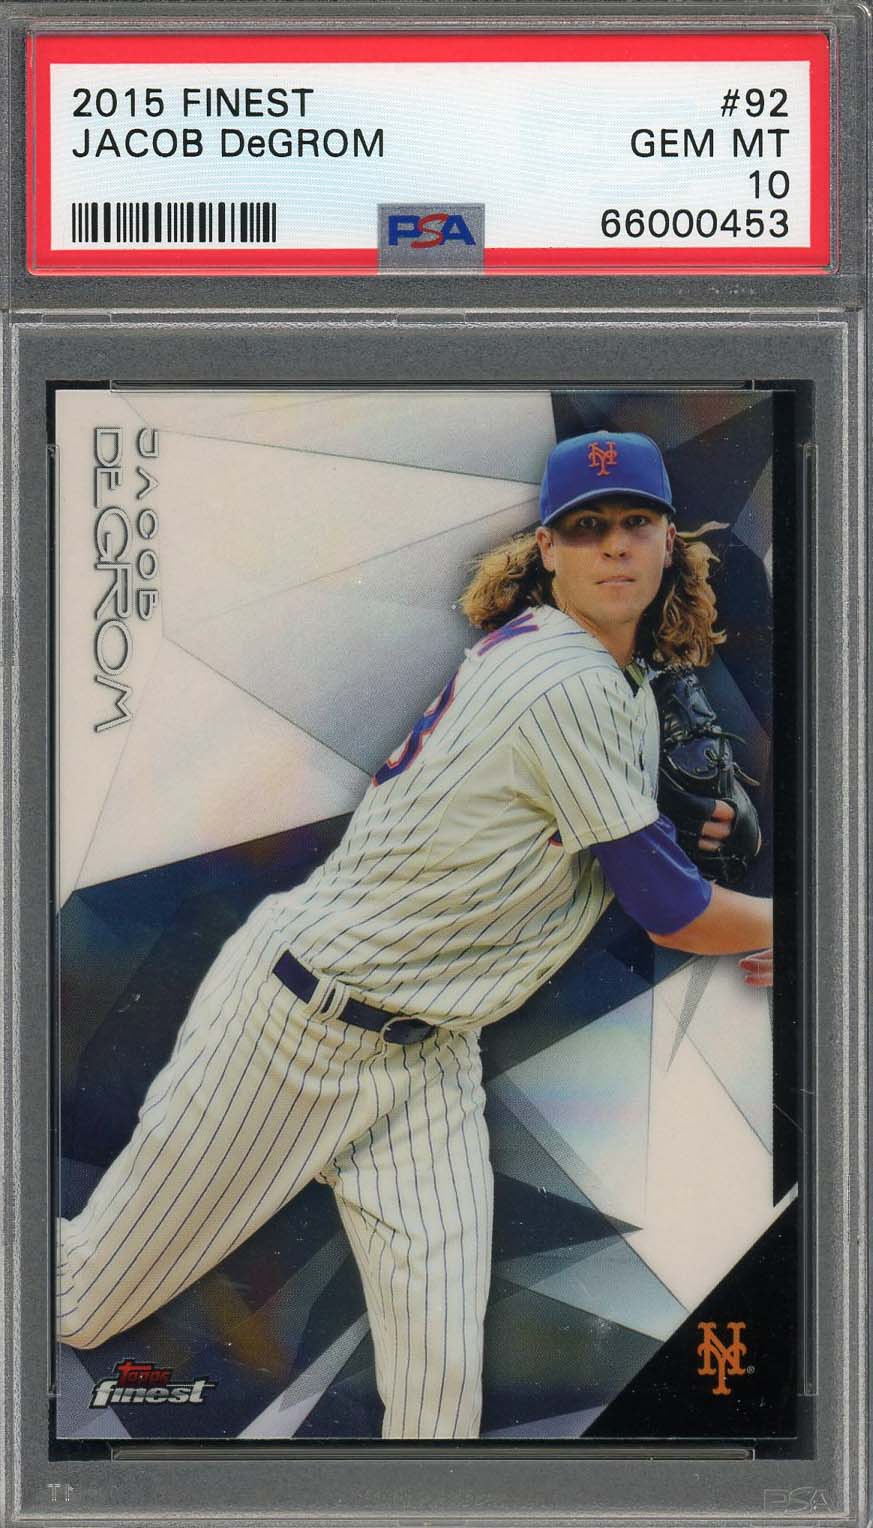 2014 Jacob deGrom Topps Update ROOKIE RC #US57 New York Mets 10